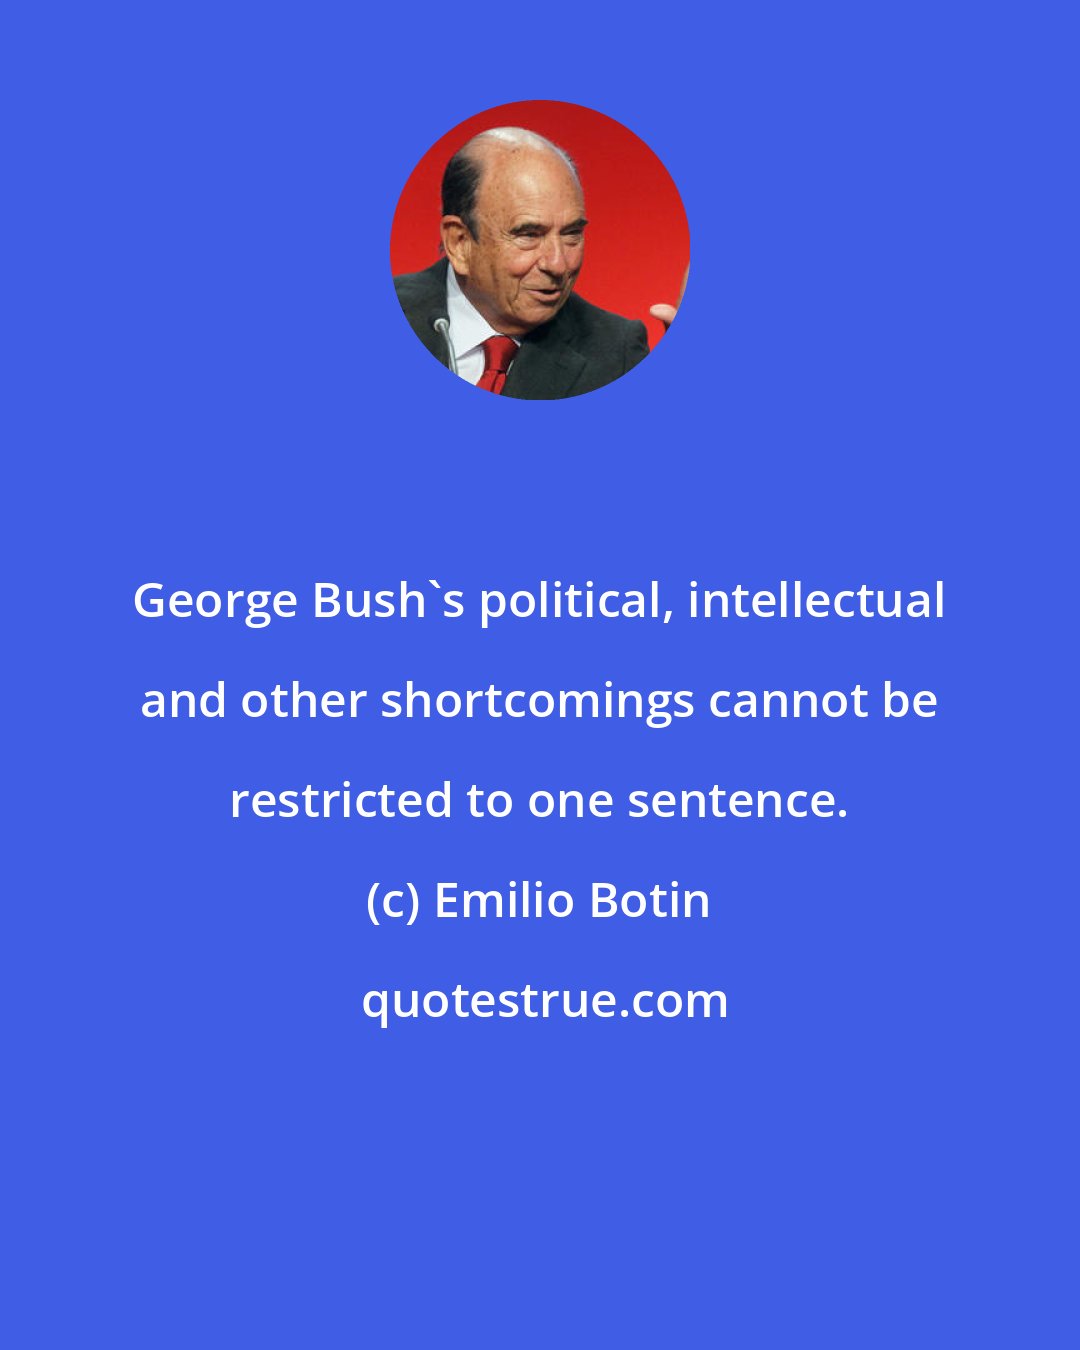 Emilio Botin: George Bush's political, intellectual and other shortcomings cannot be restricted to one sentence.